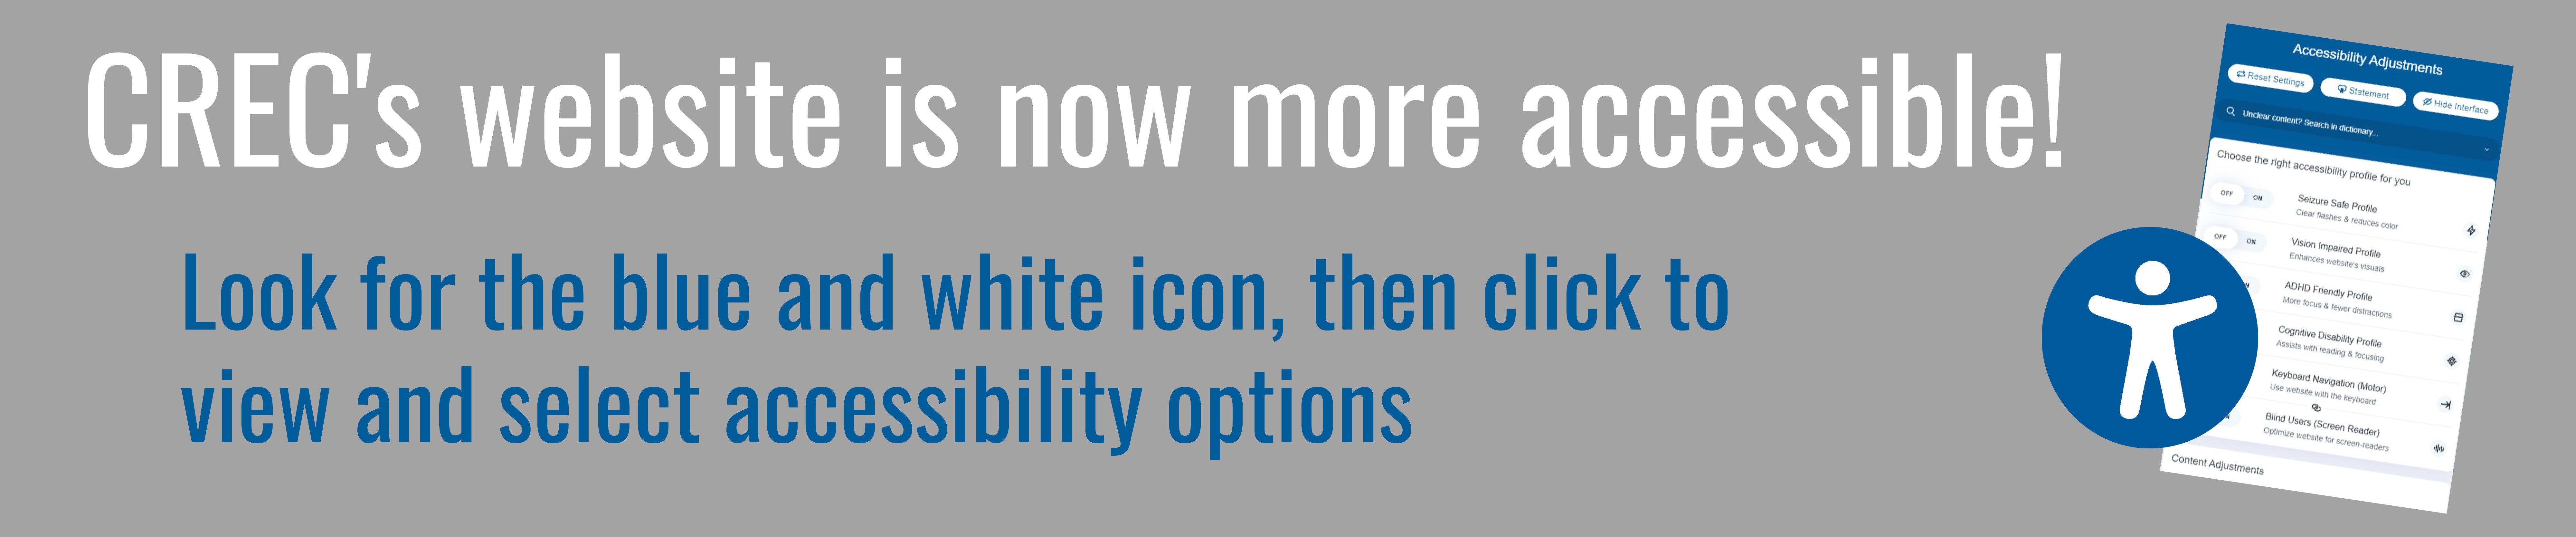 New accessibility options on our website